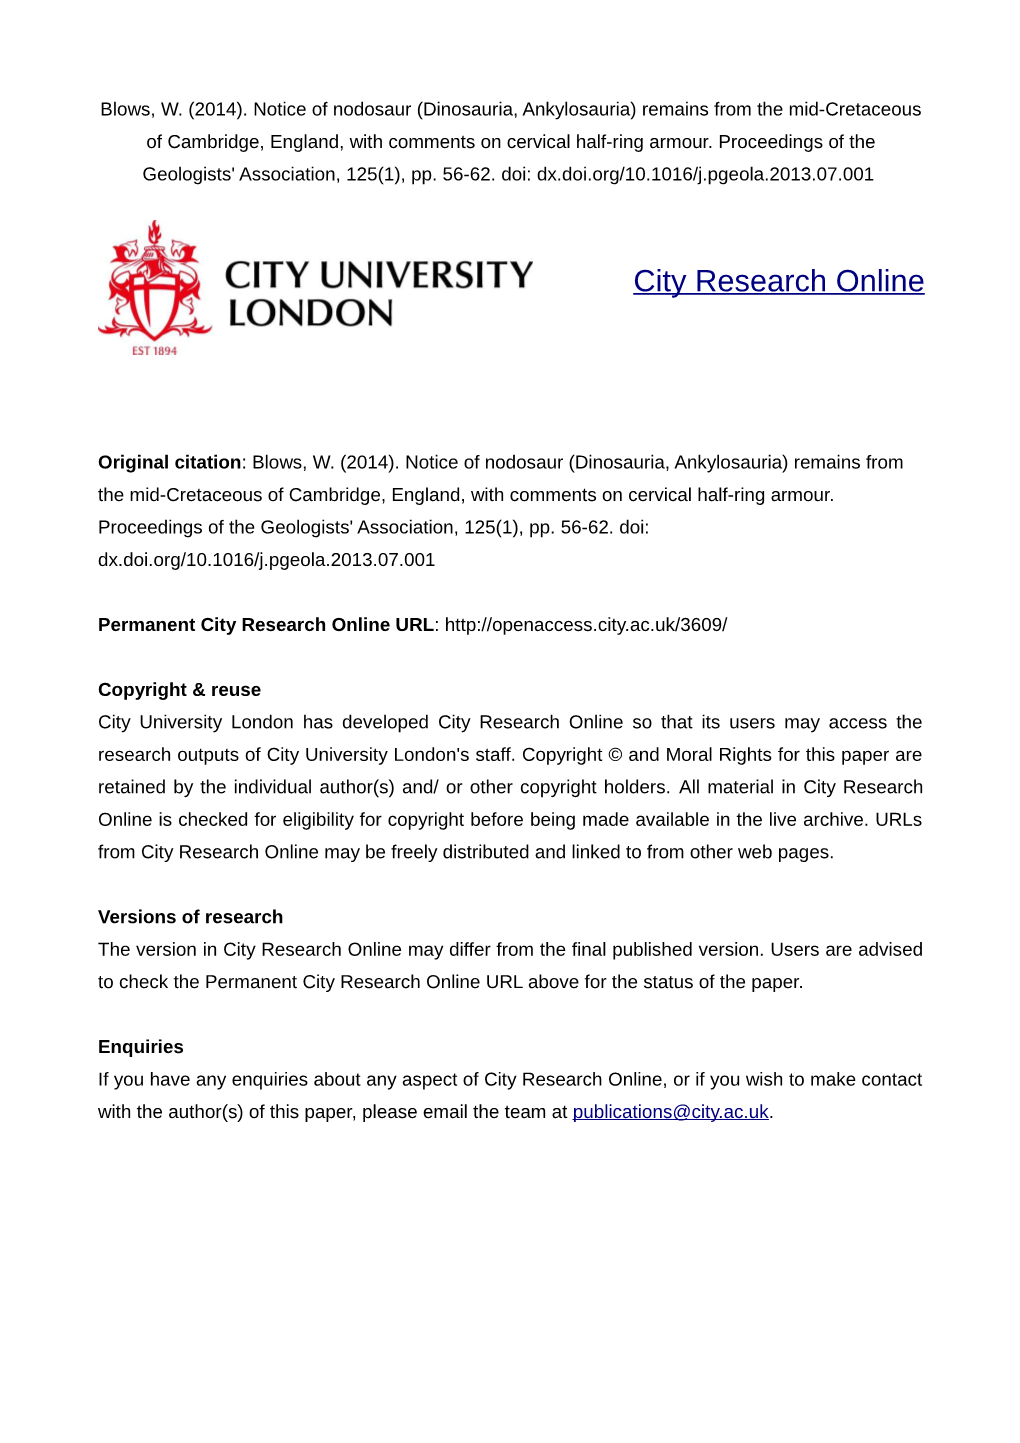 City Research Online